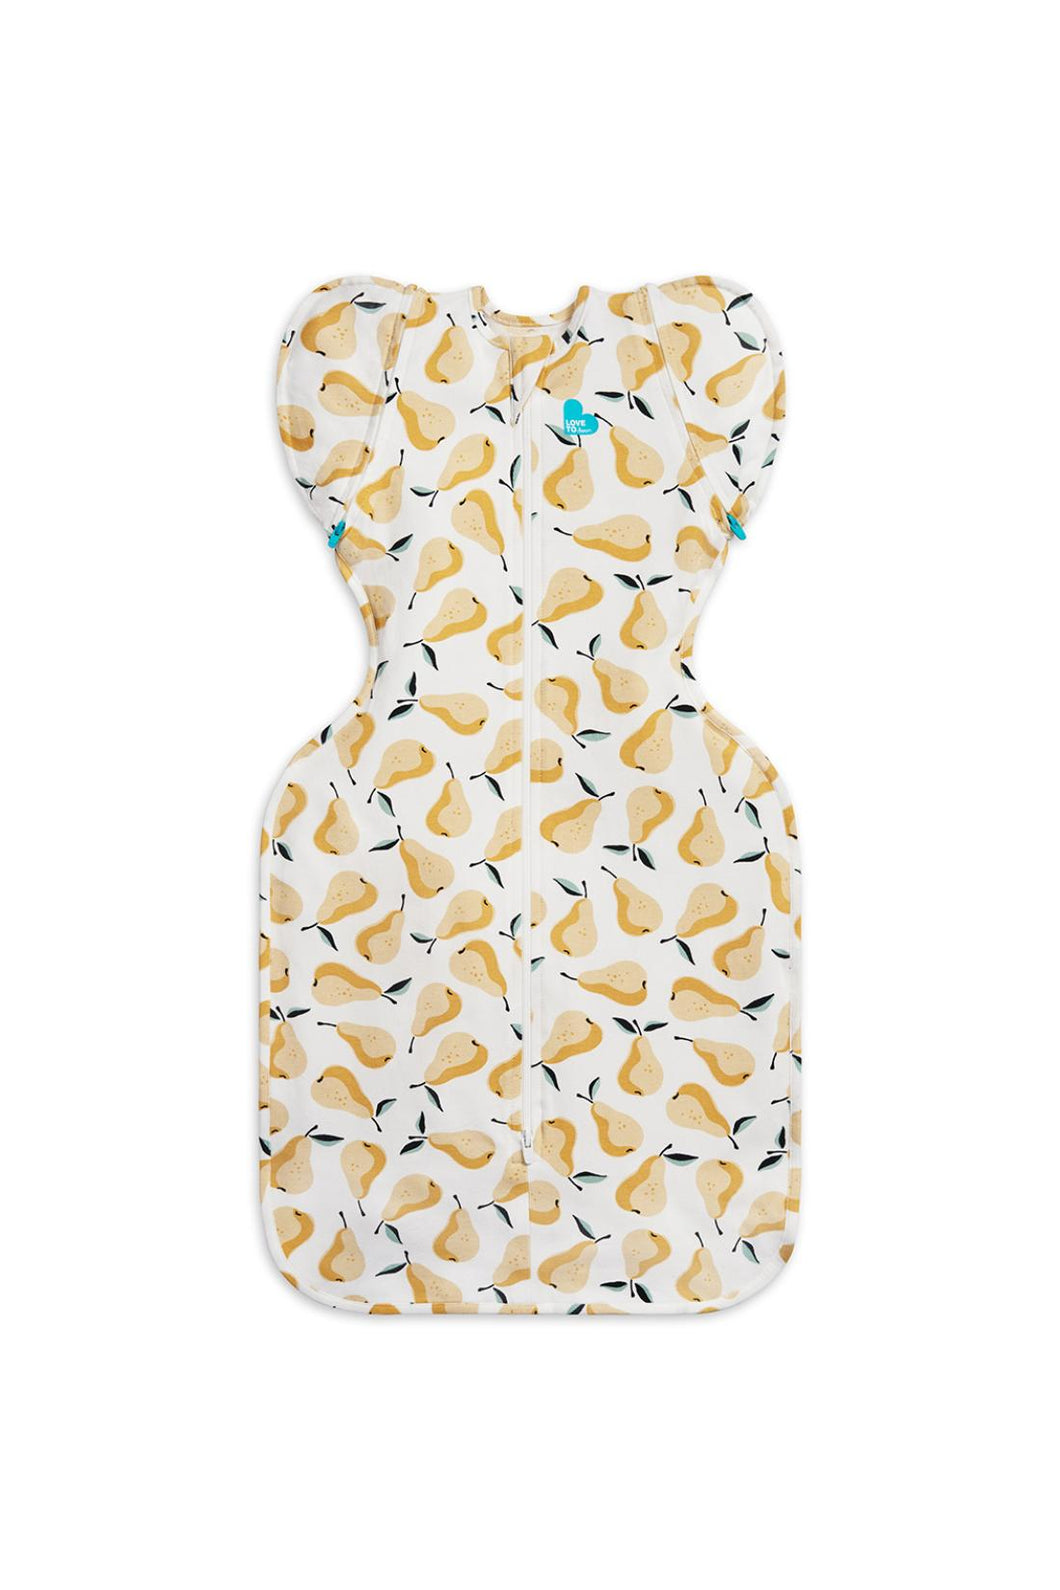 Love to Dream Swaddle Up™ Transition Bag Original Cotton 1.0 TOG Pear Ochre